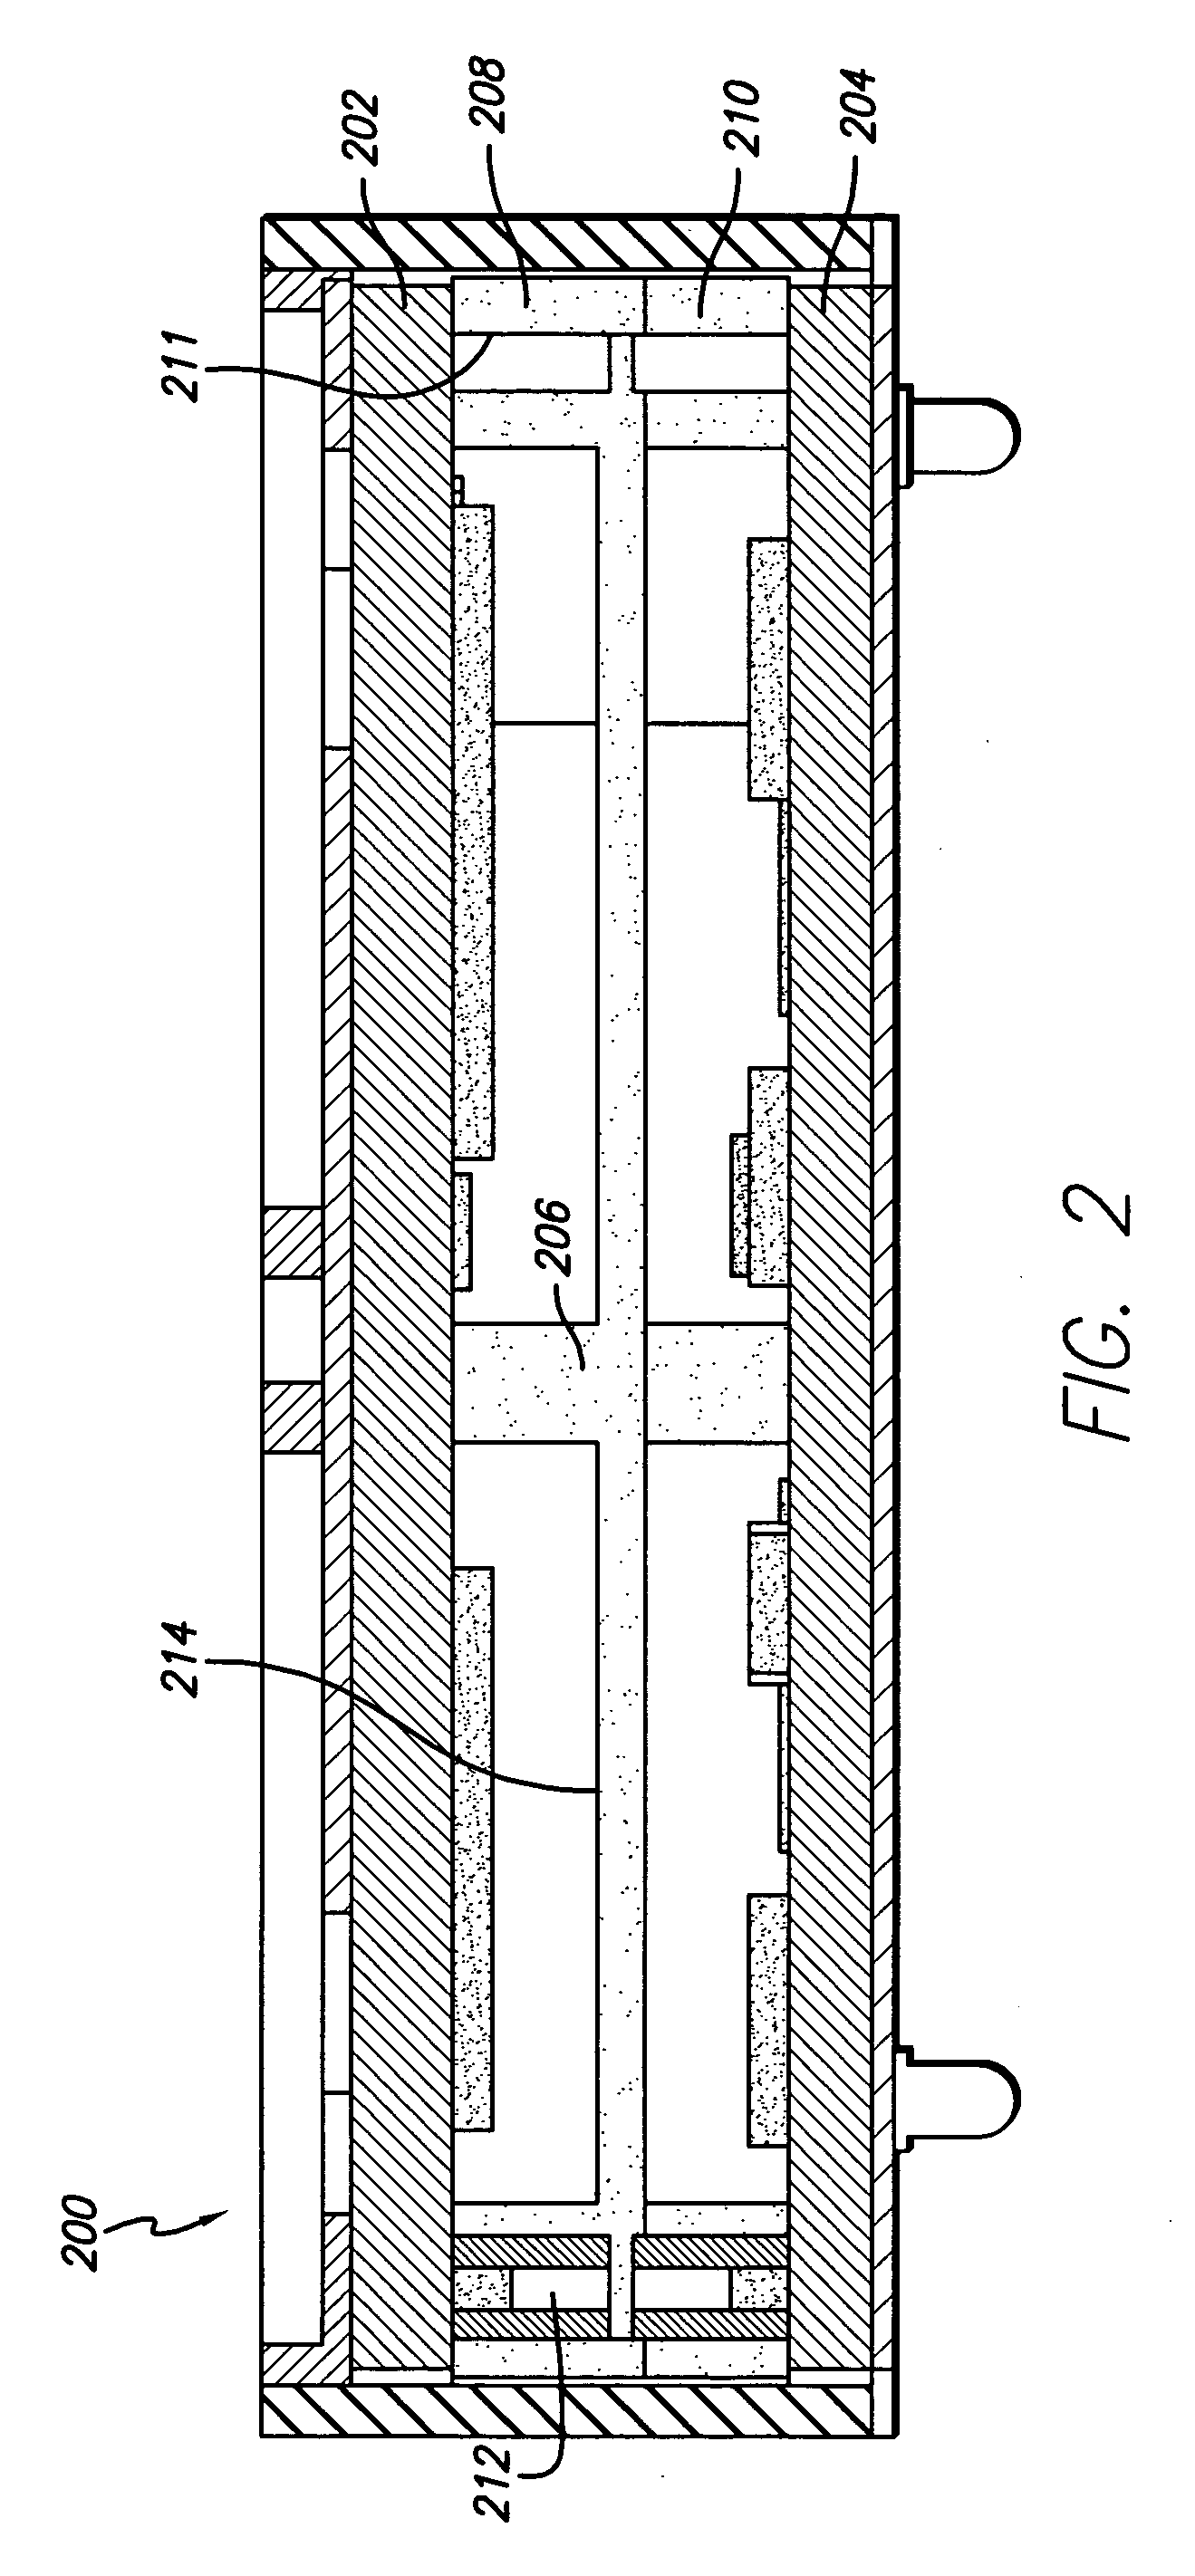 Multilayer thin film hydrogen getter and internal signal EMI shield for complex three dimensional electronic package components